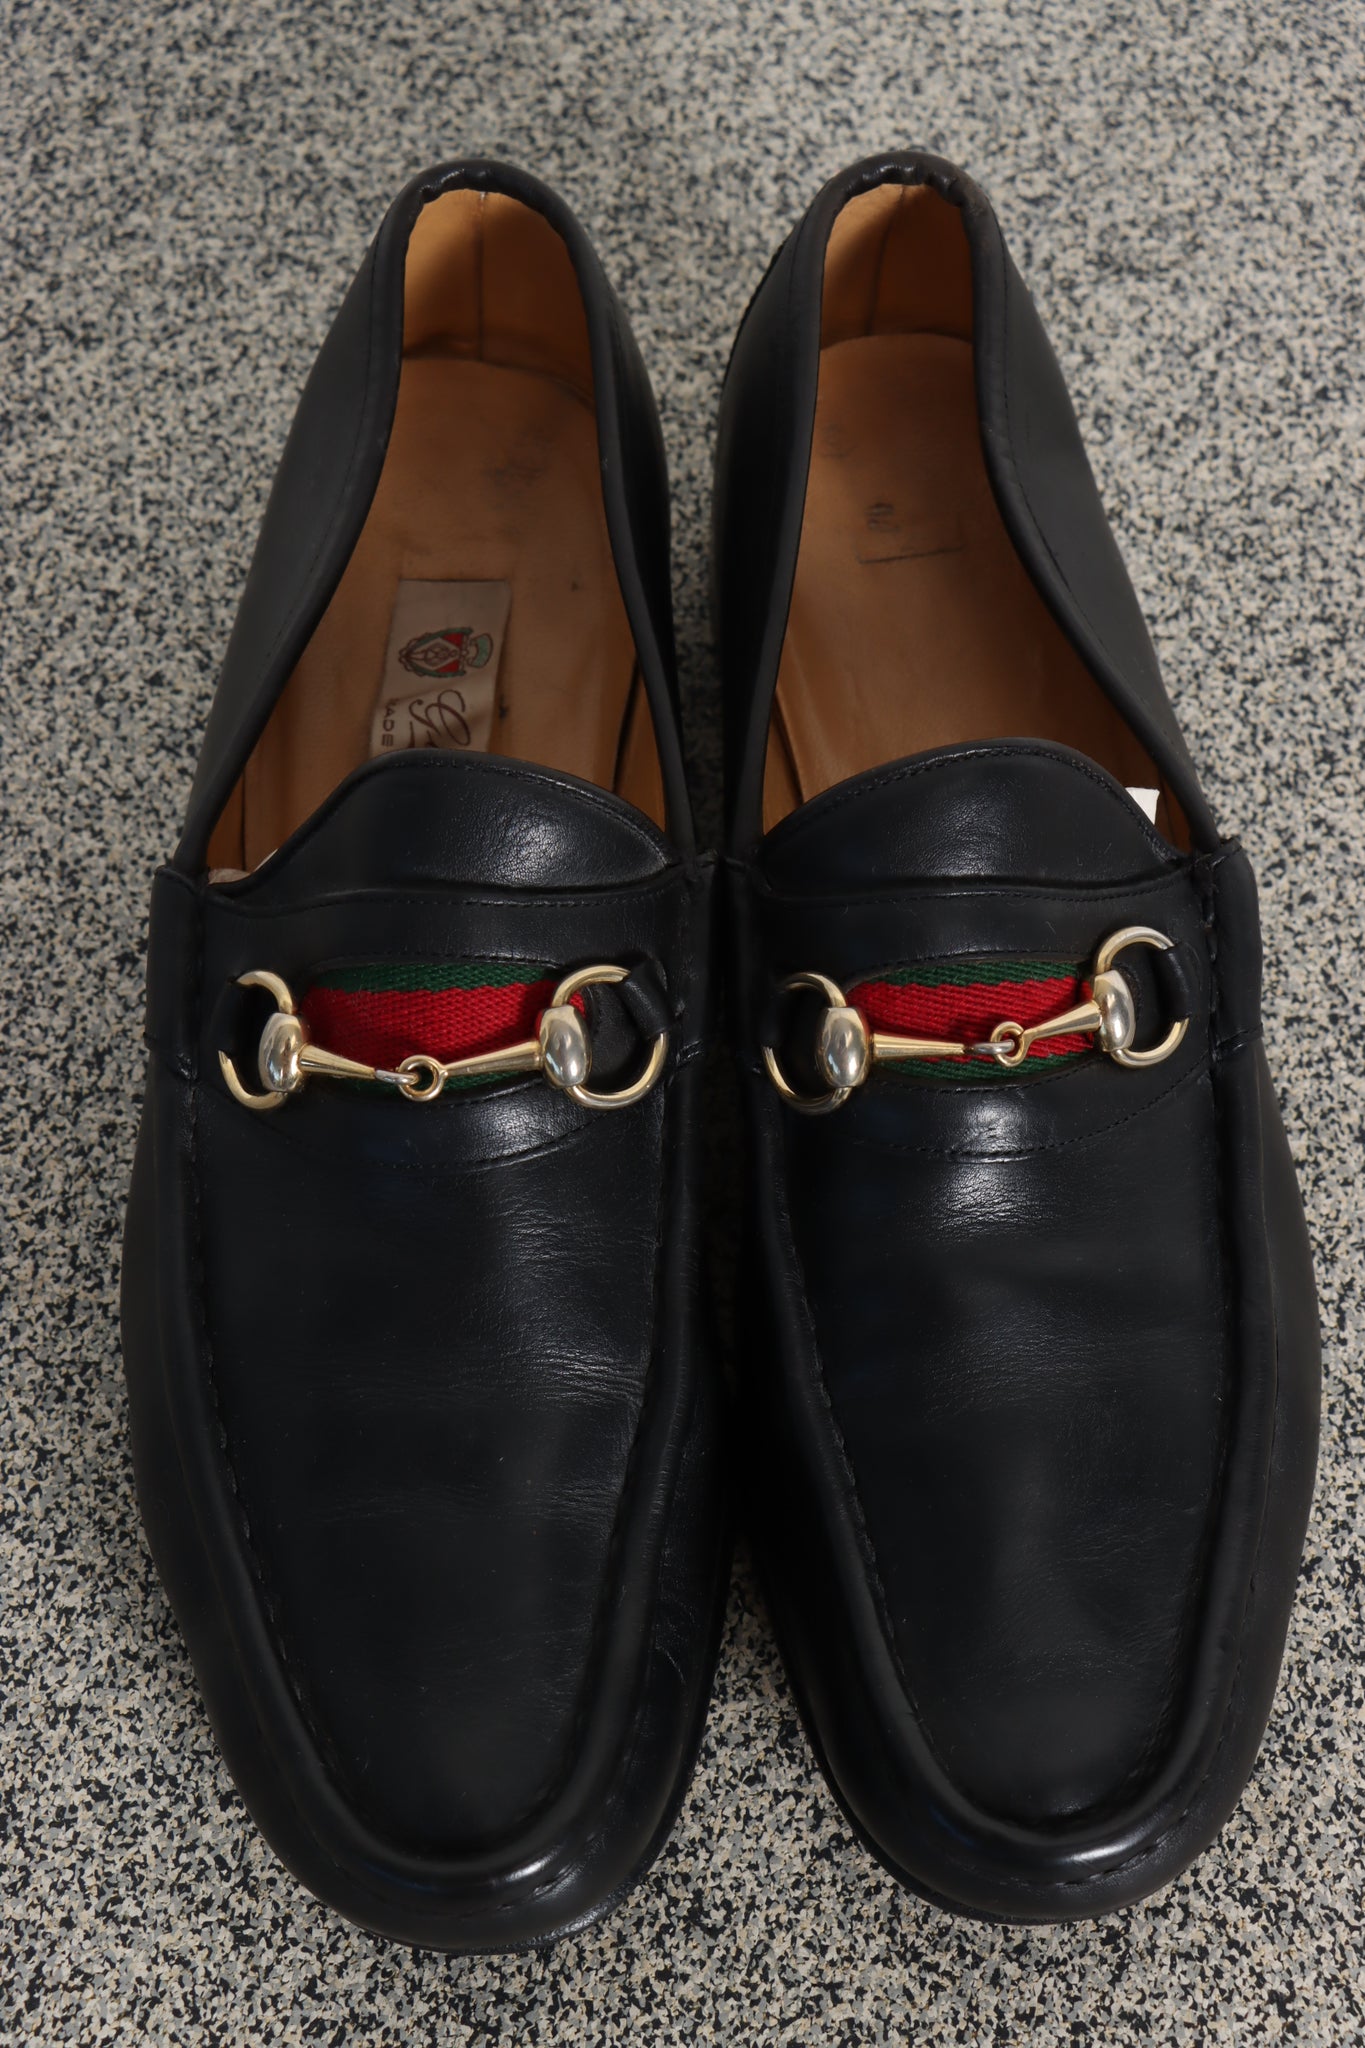 Gucci Men's Loafer with Horsebit